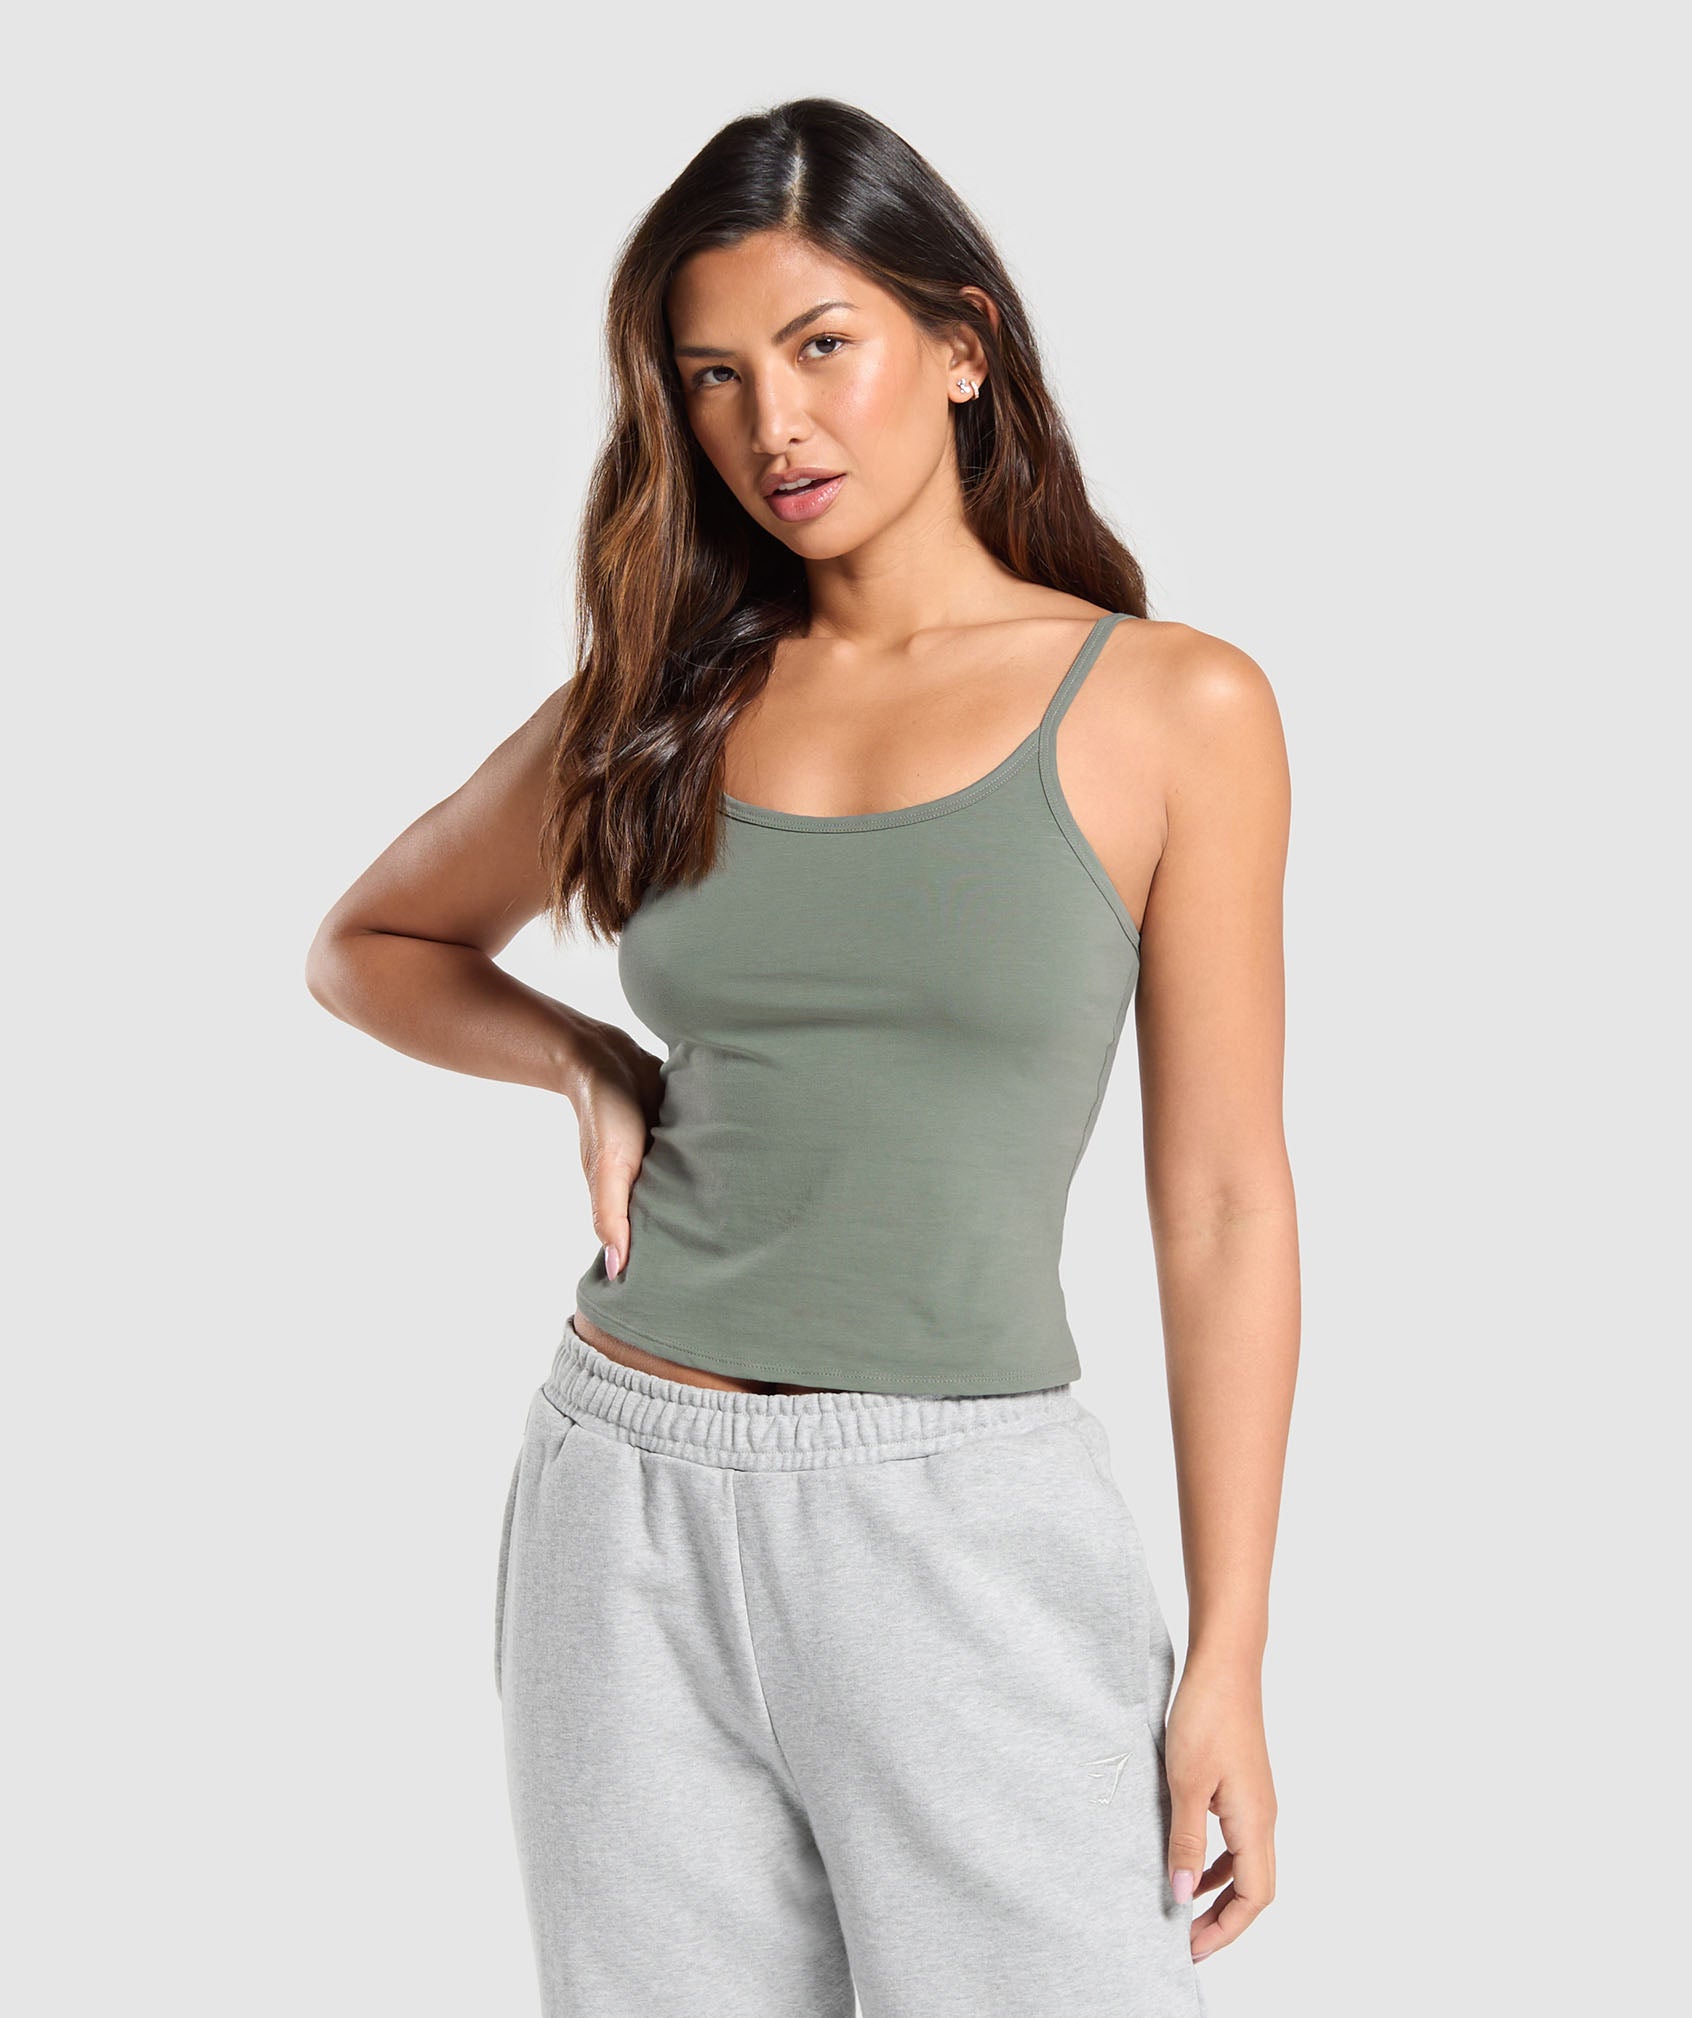 Cotton Cami Tank in Unit Green - view 1